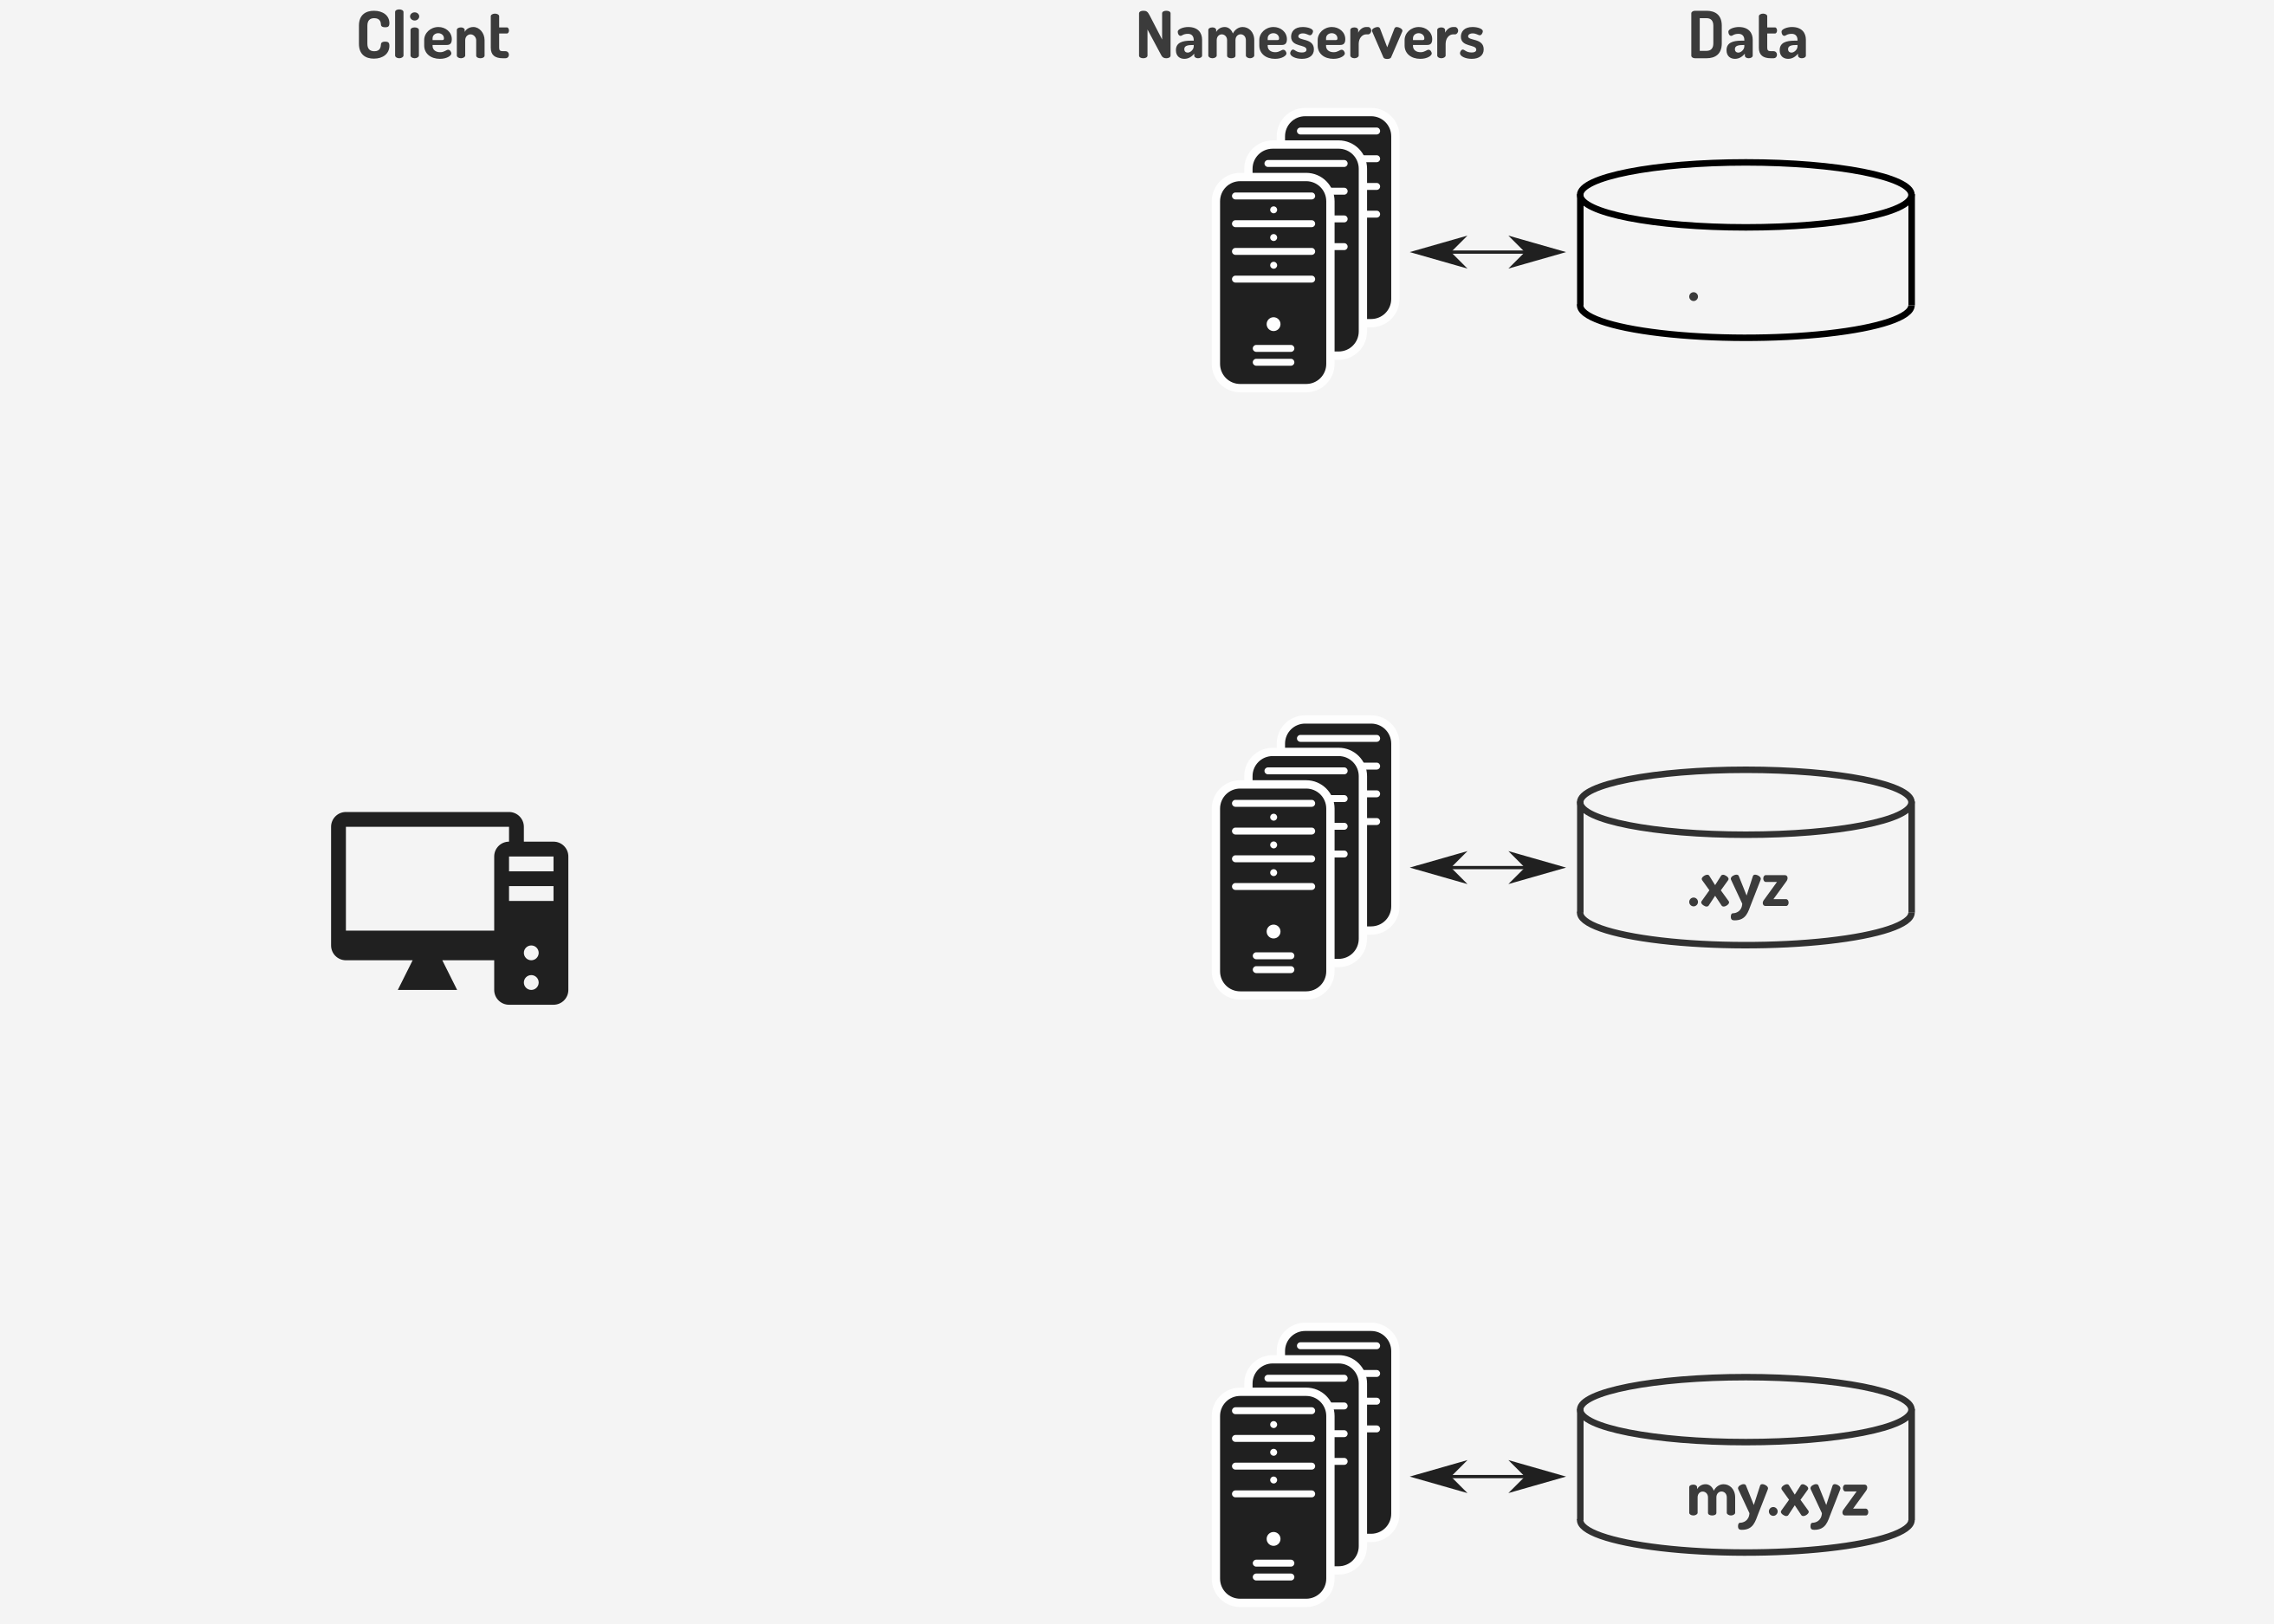 Traditional DNS nameserver infrastructure required for my.xyz domain